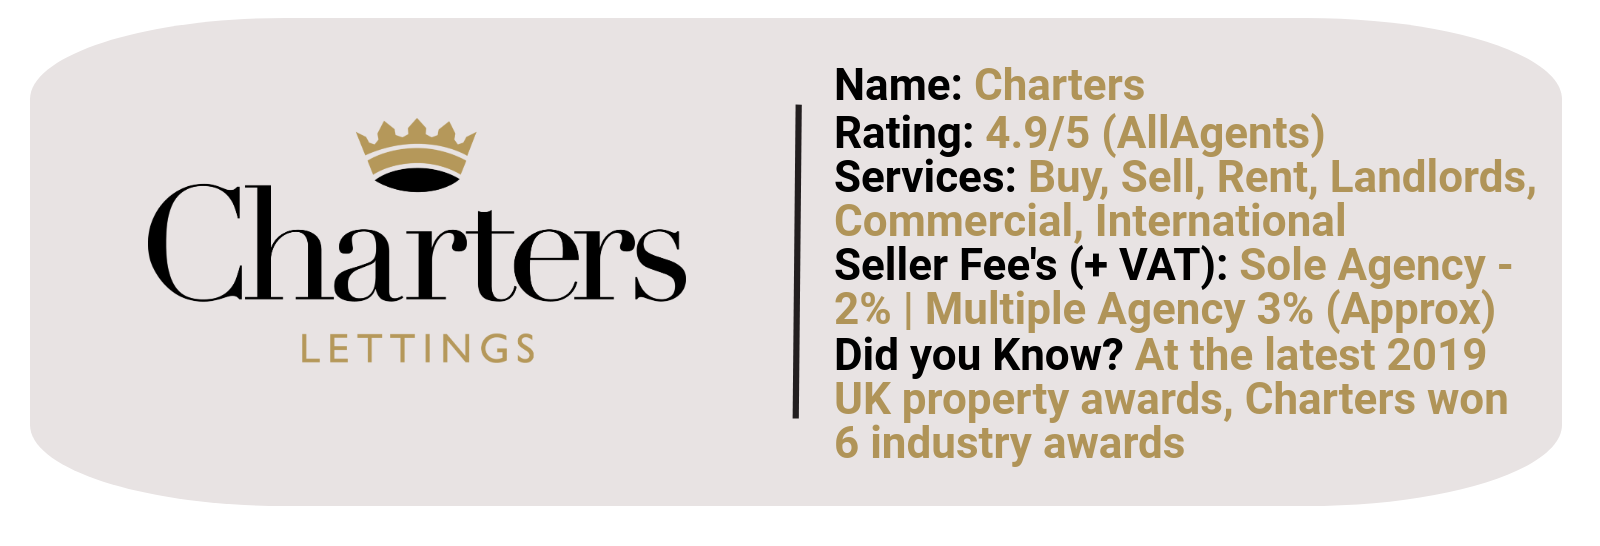 Charters statistics featuring rating, services & seller fee's